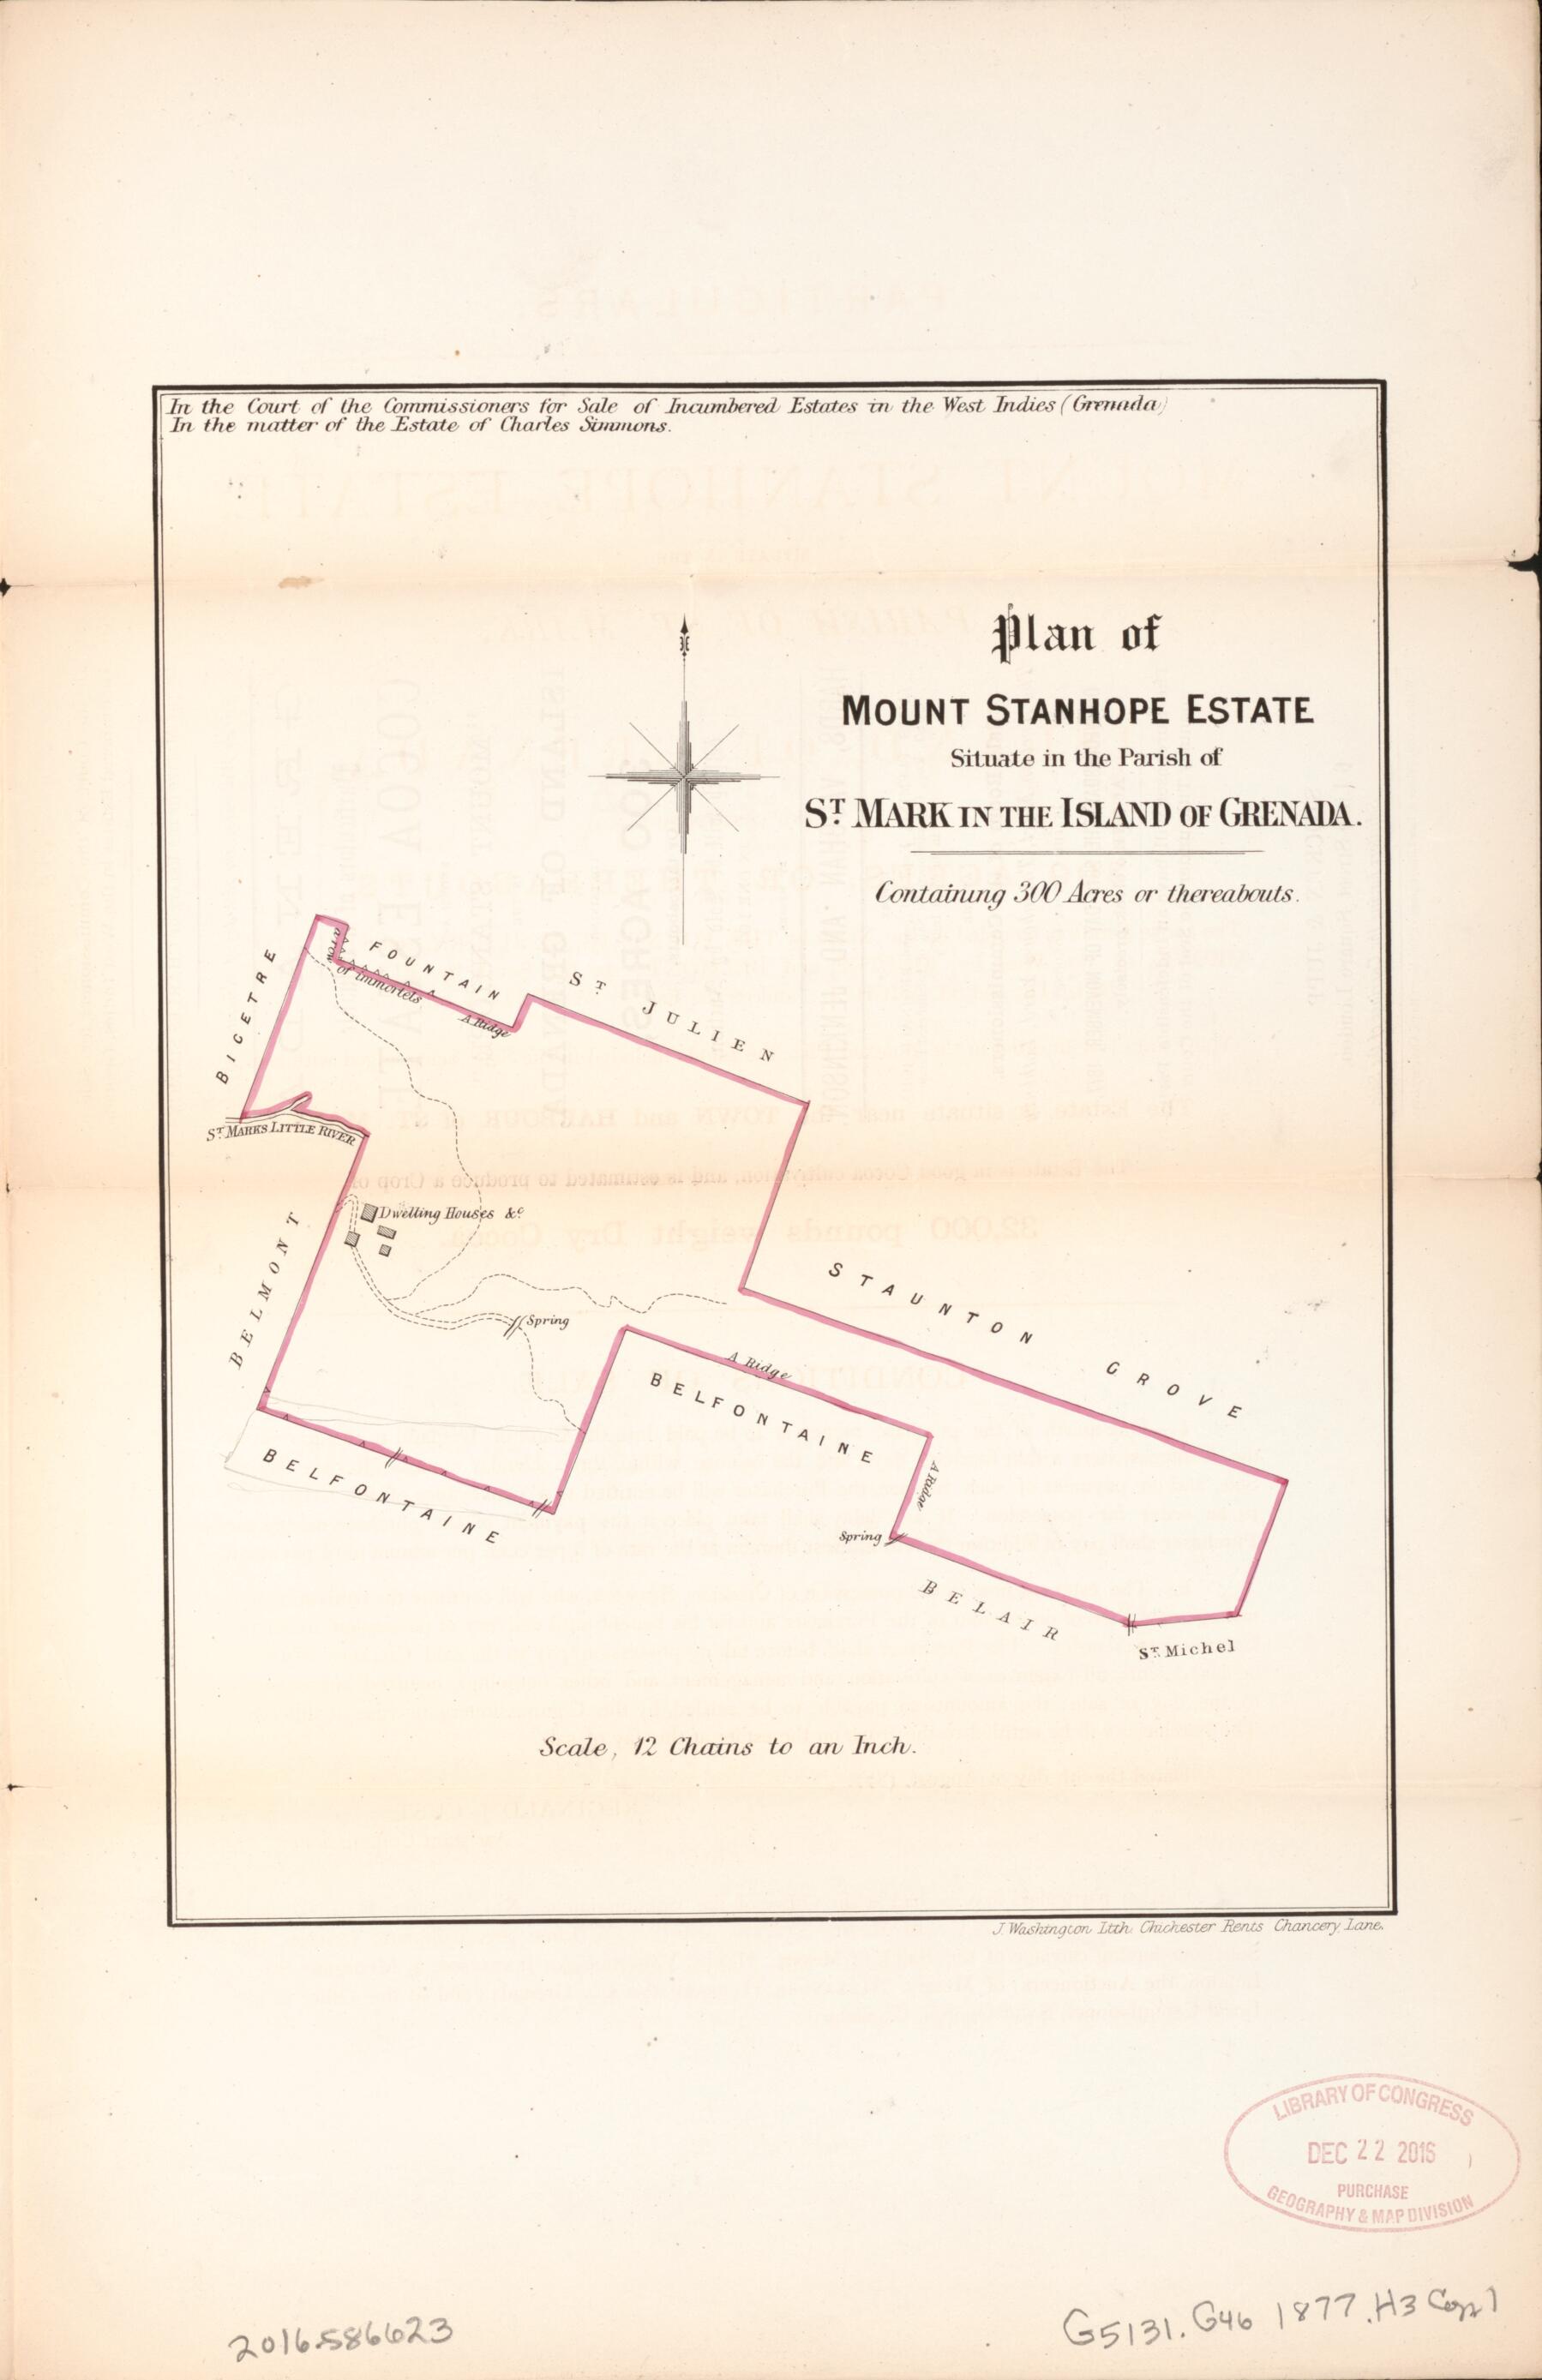 This old map of Plan of Mount Stanhope Estate from Encumbered Estates In the West Indies (Grenada) from 1877 was created by Vaughan Hards in 1877